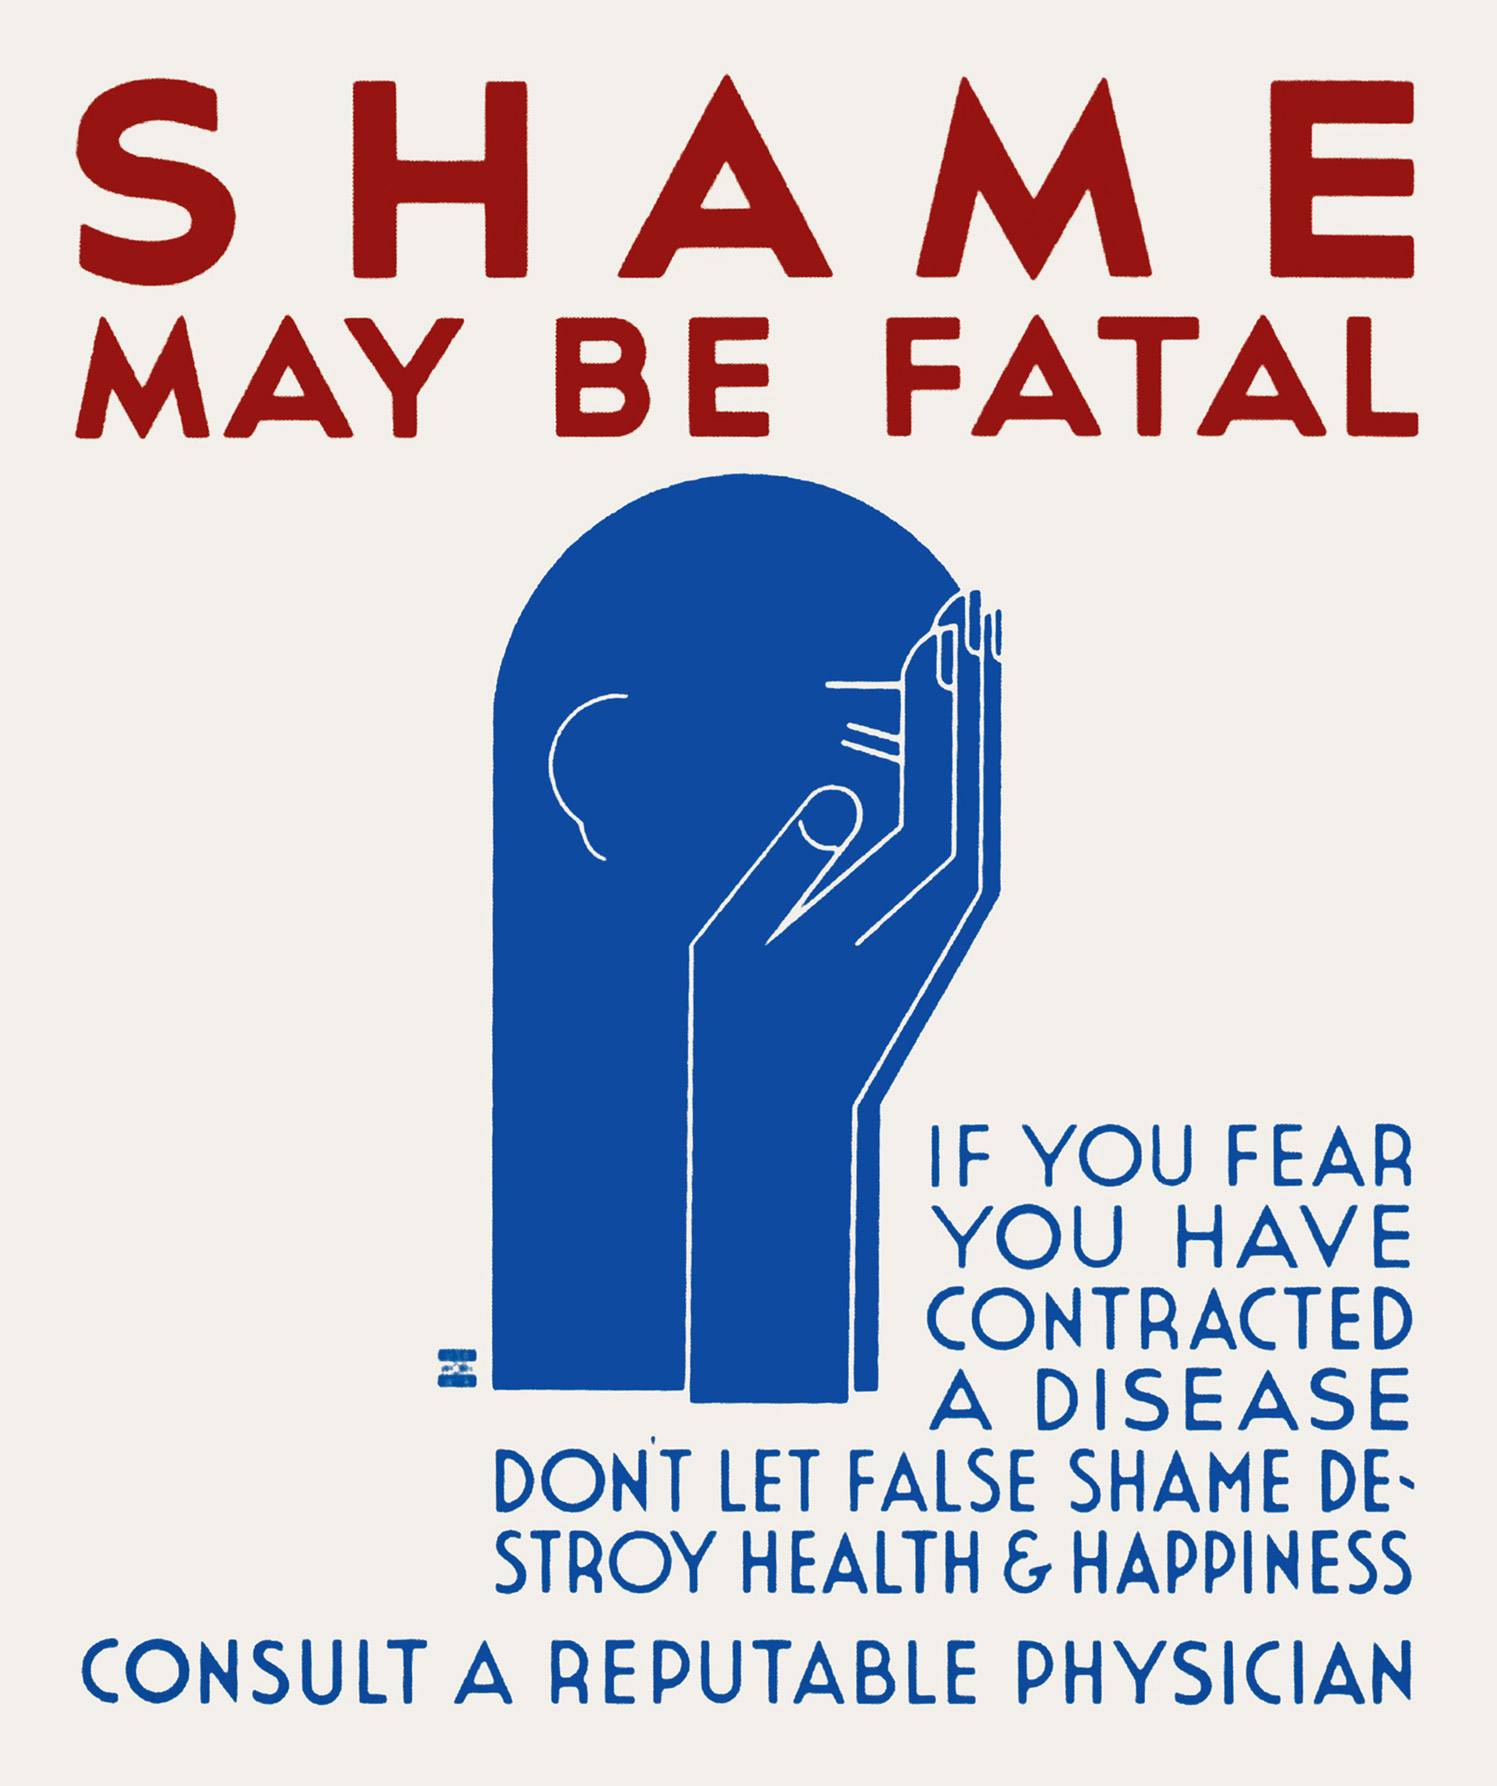 Public health poster designed by Foster Humfreville and Alex Kallenberg
for the WPA Federal Art Project, 1937.